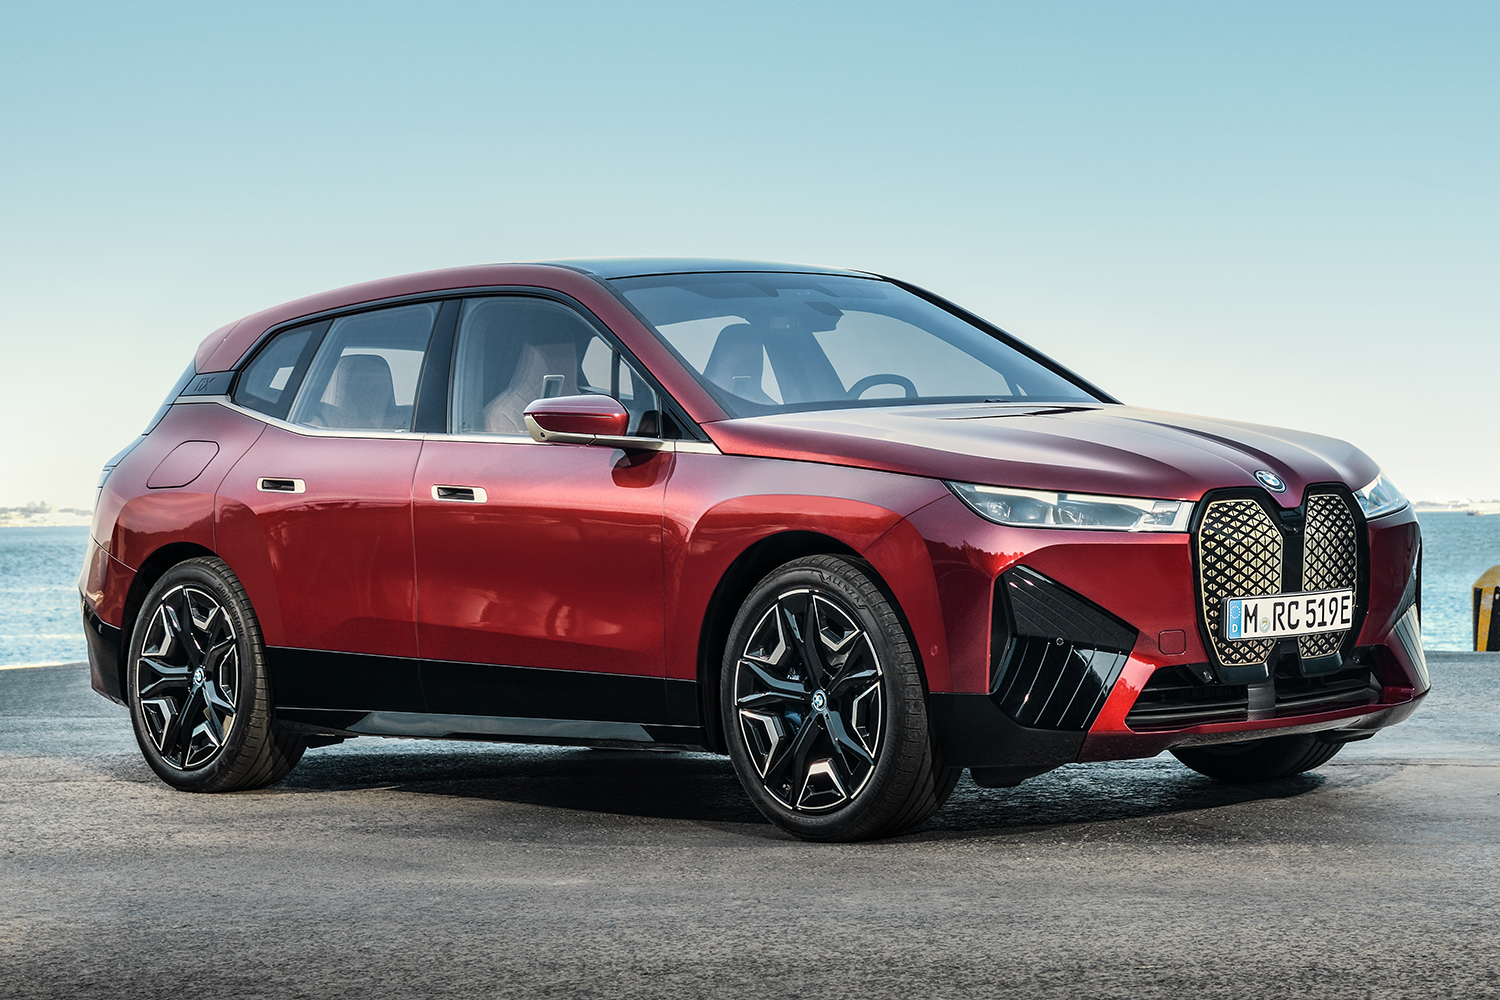 The BMW iX xDrive50 electric SUV in red